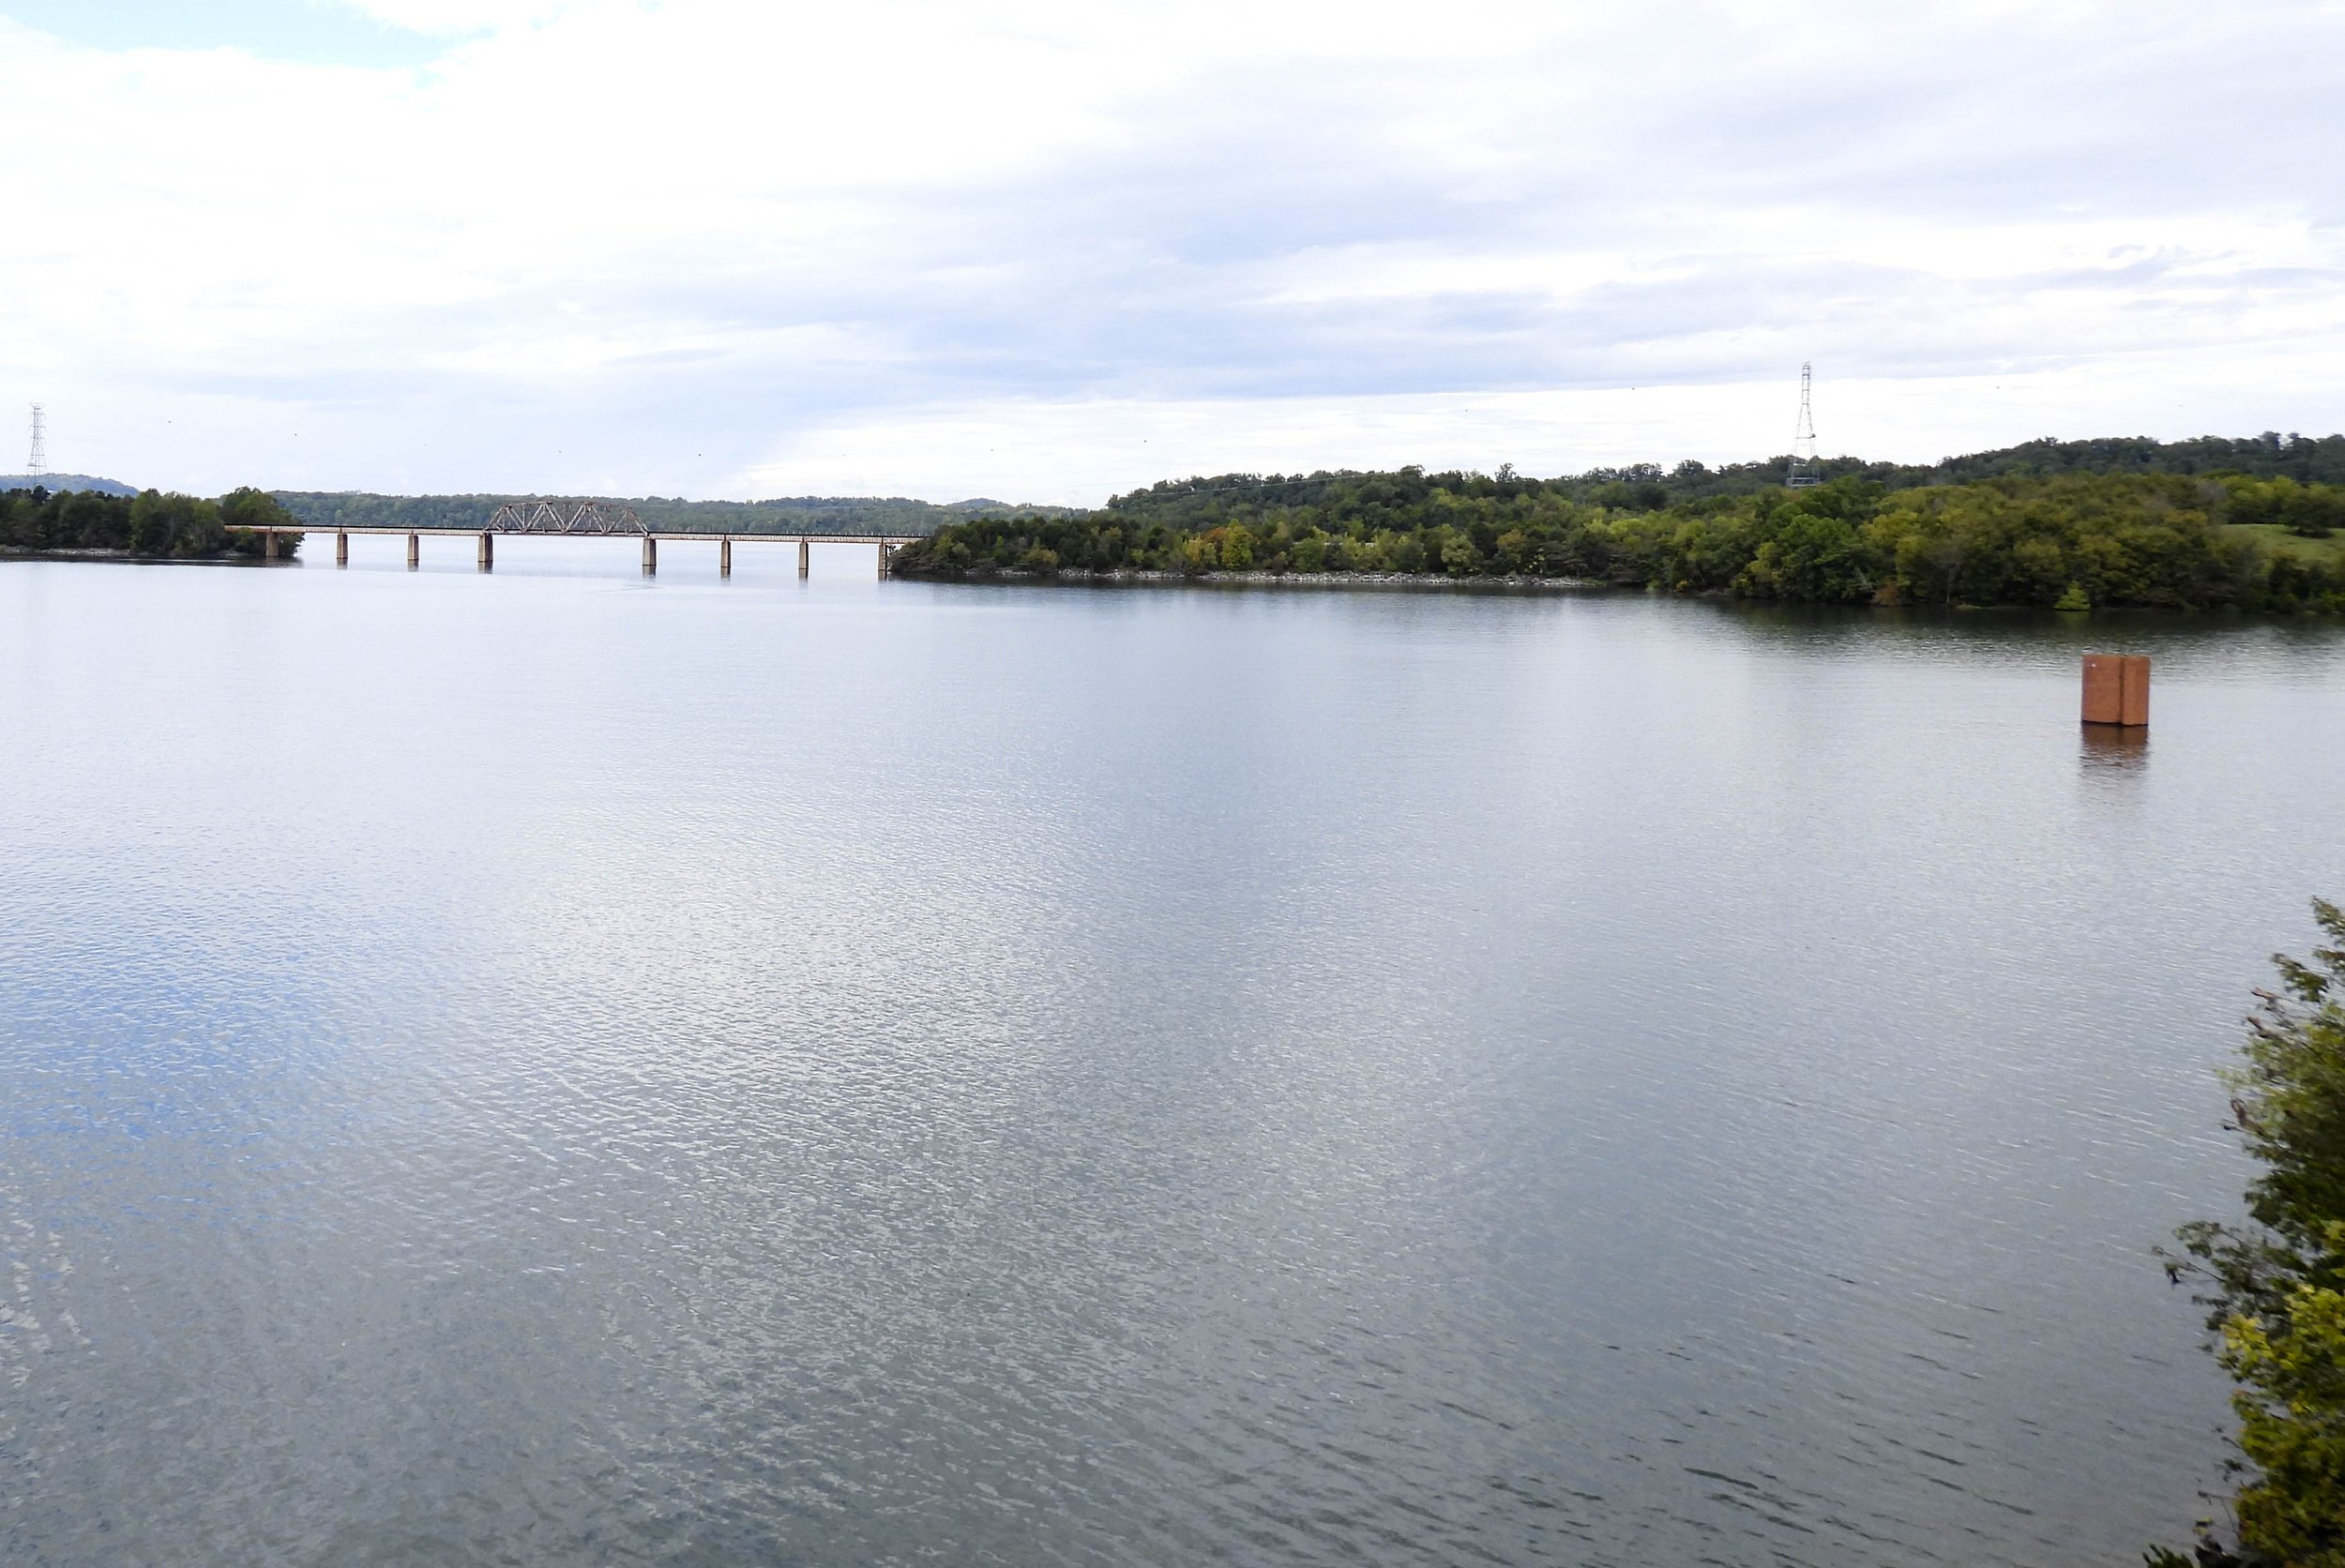 An image of Tellico Lake showing one of the silos.